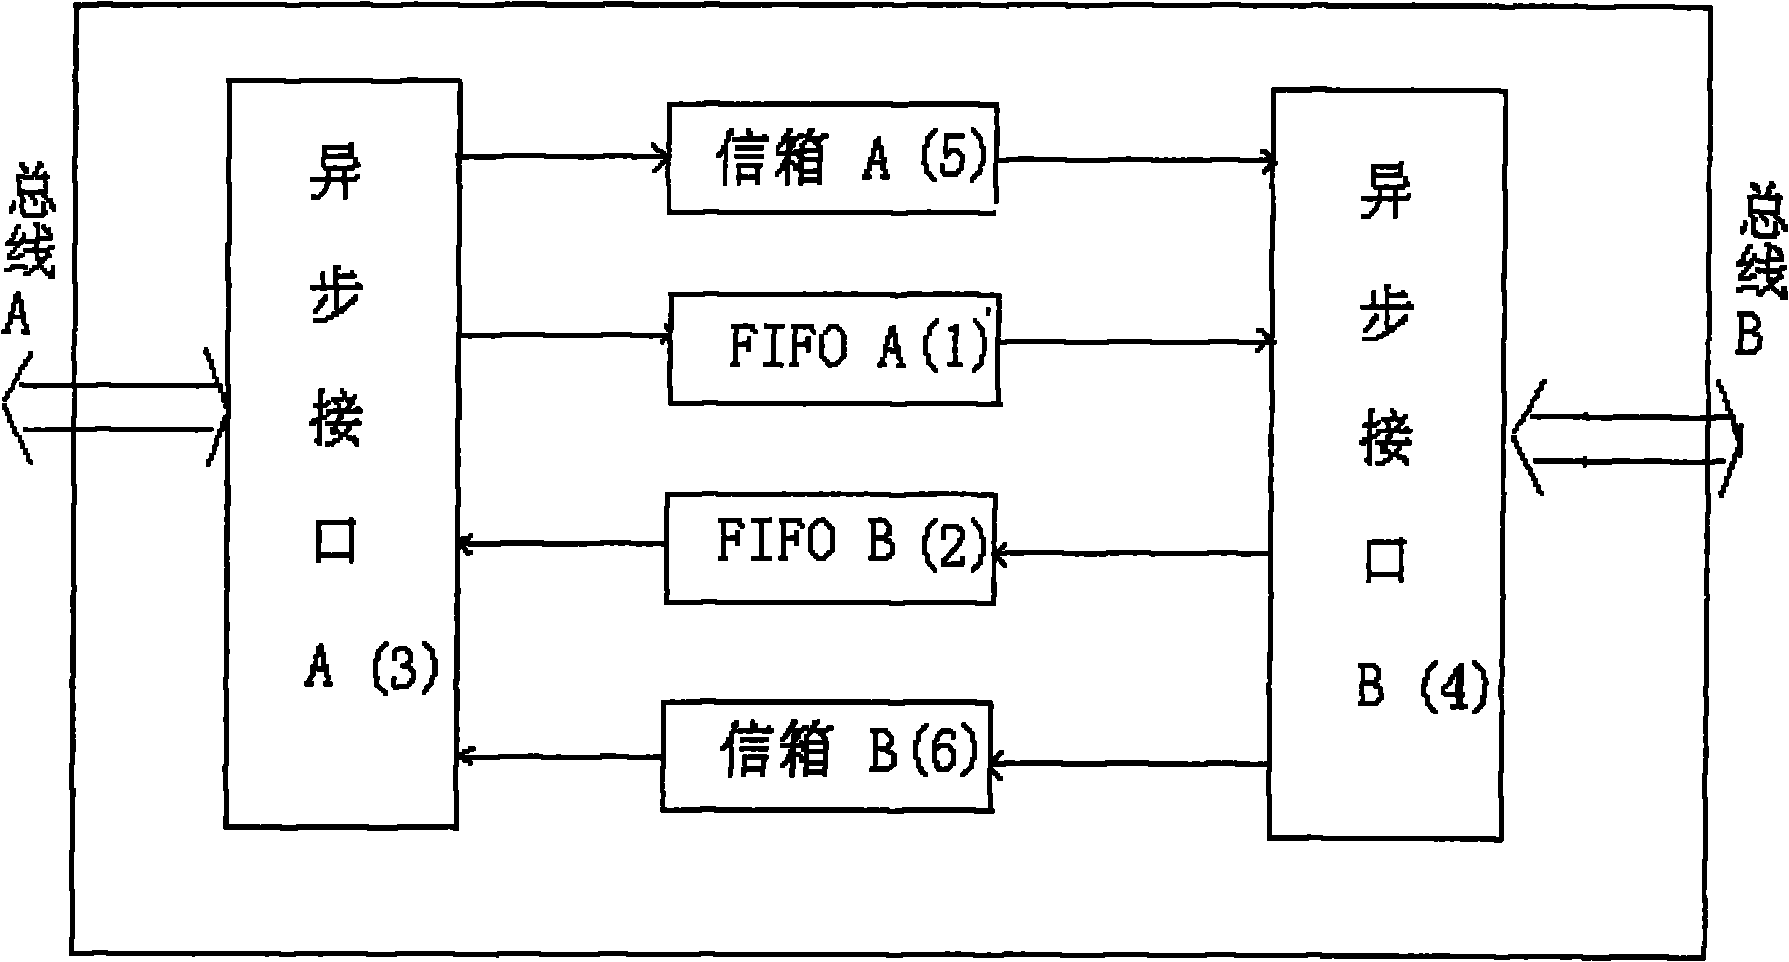 Bidirectional high speed FIFO storage implemented on the basis of FPGA